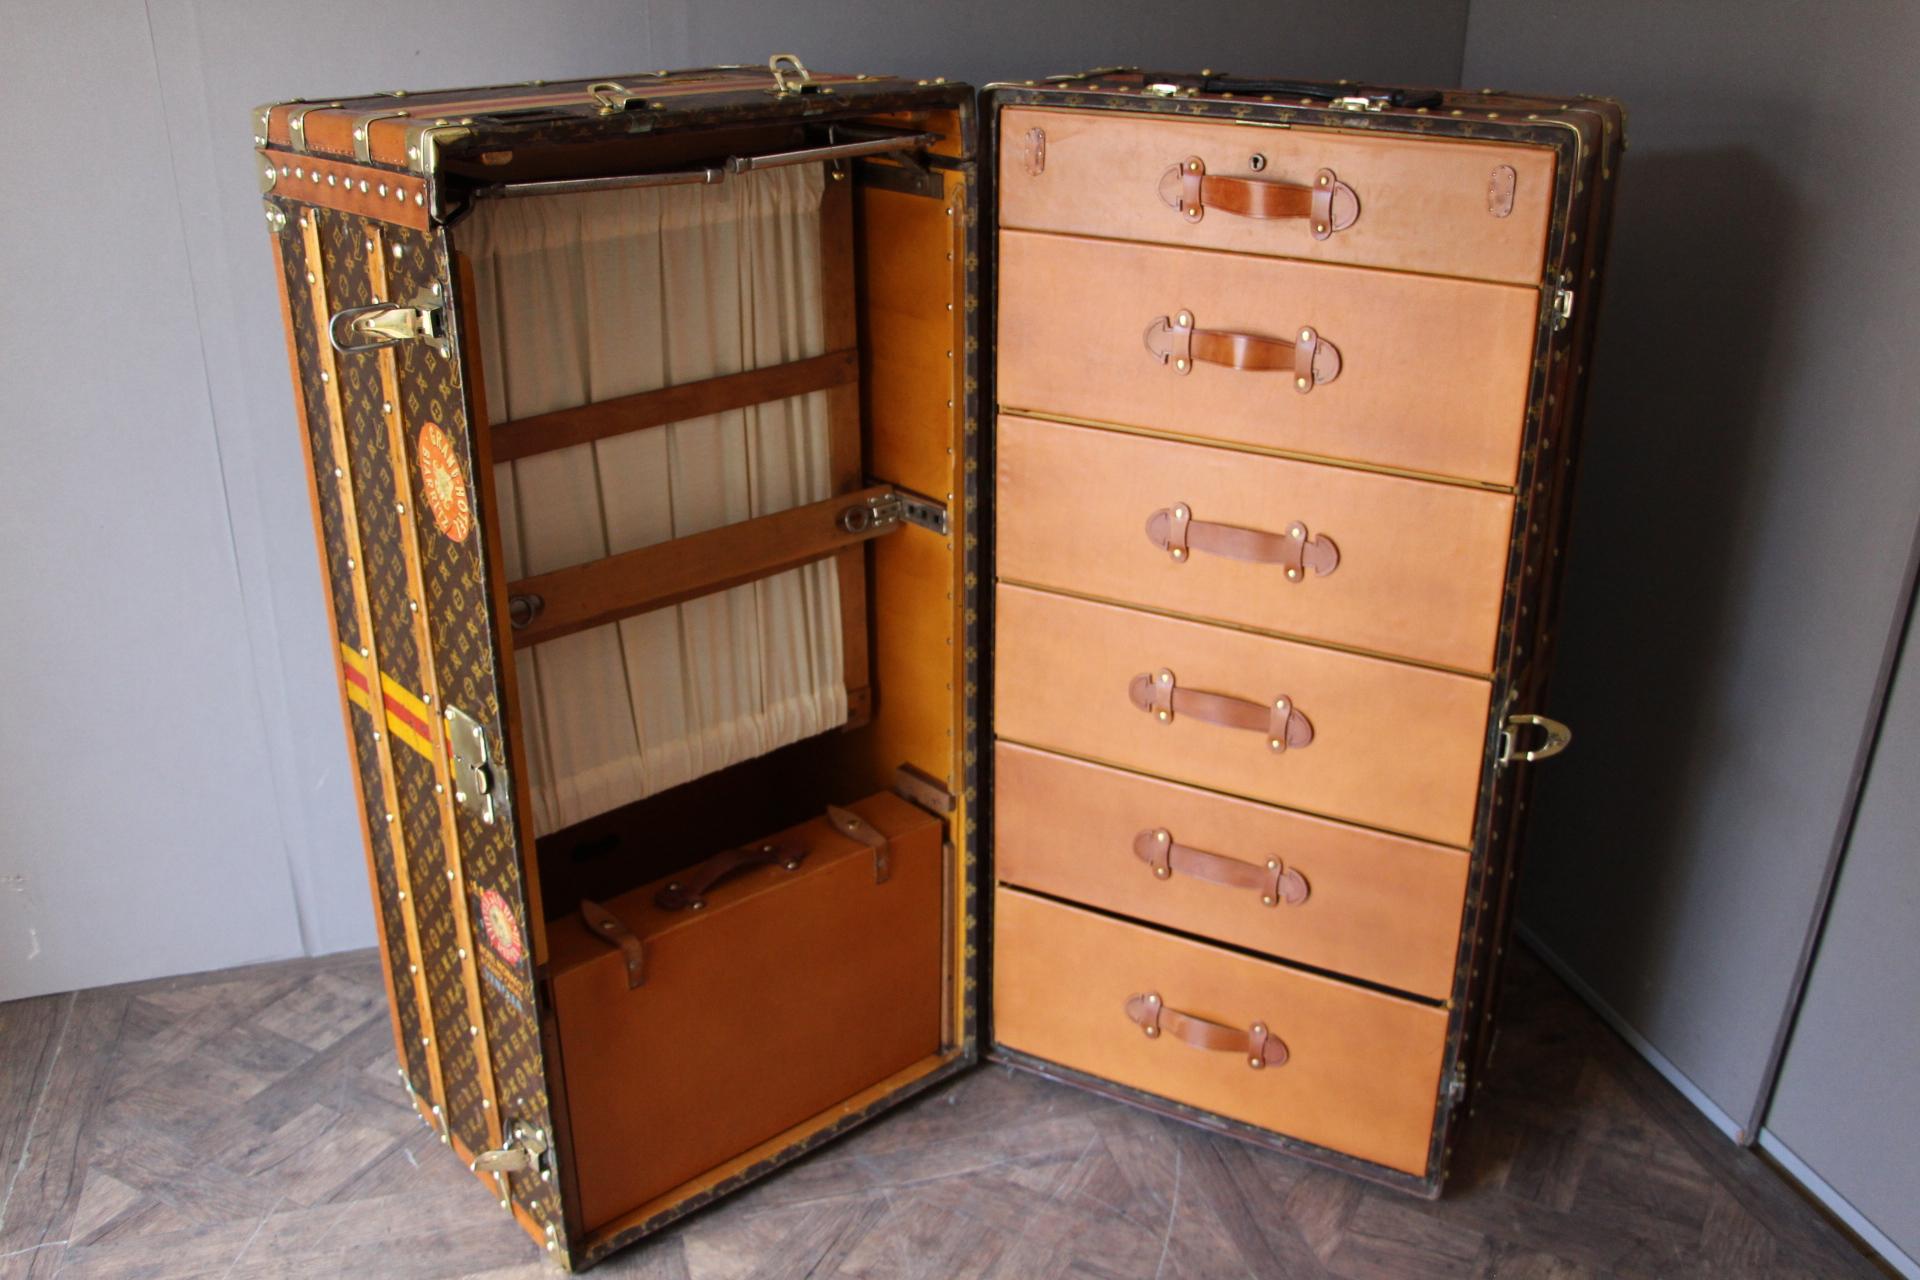 This impressive Louis Vuitton wardrobe features stenciled monogram canvas, lozine trims, brass LV stamped locks and studs as well as its lift top. It has got a beautiful warm patina.
Customized painted yellow and red strips, as well as many